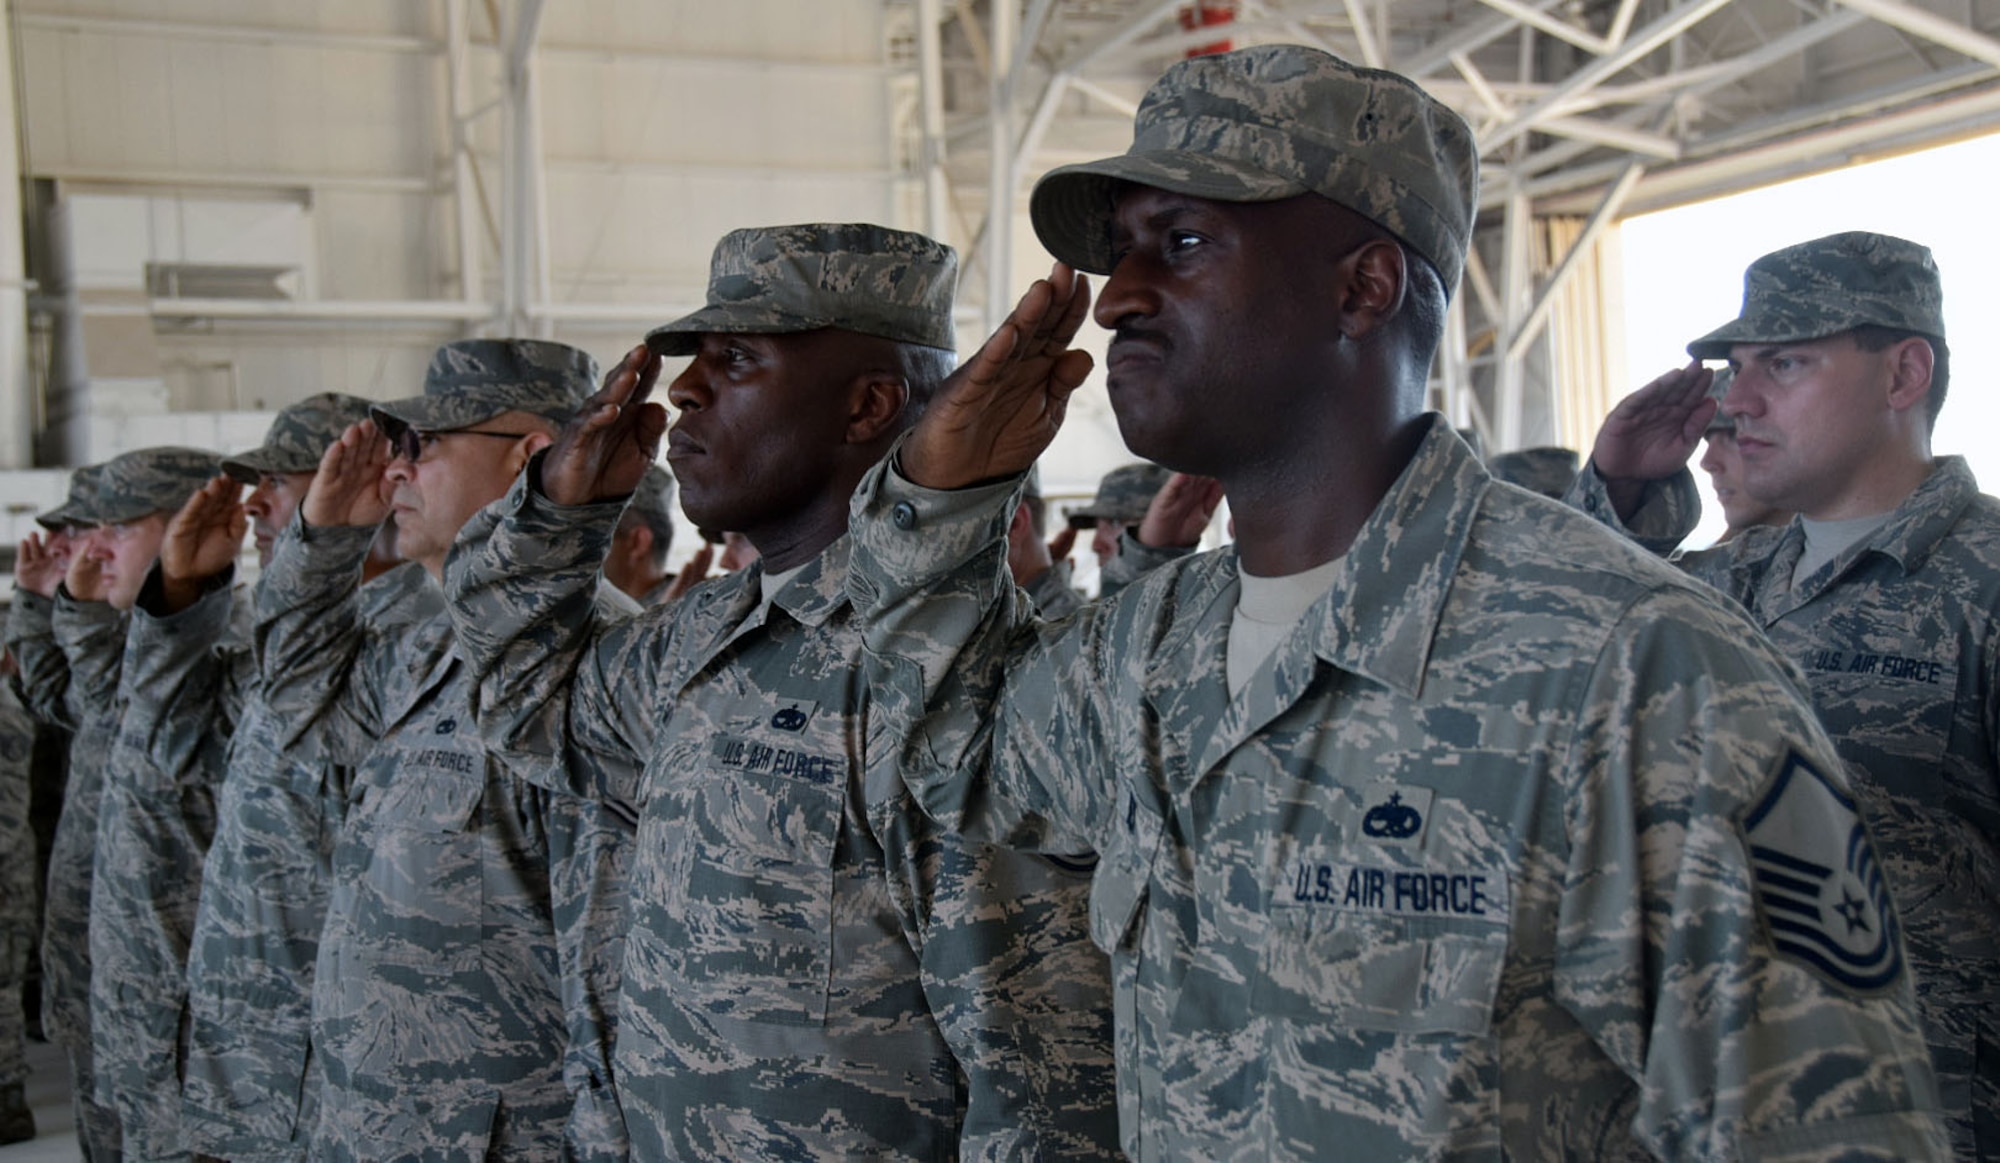 Members of the 433rd Maintenance Group render a salute during the assumption of command ceremony for their new group commander, Lt. Col. Charles V. Pratt at Joint Base San Antonio-Lackland July 15, 2017. Pratt’s precious assignment was as deputy group commander and maintenance squadron commander at Moffett Air Field, California. (U.S. Air Force photo/Tech Sgt. Carlos J. Trevino)